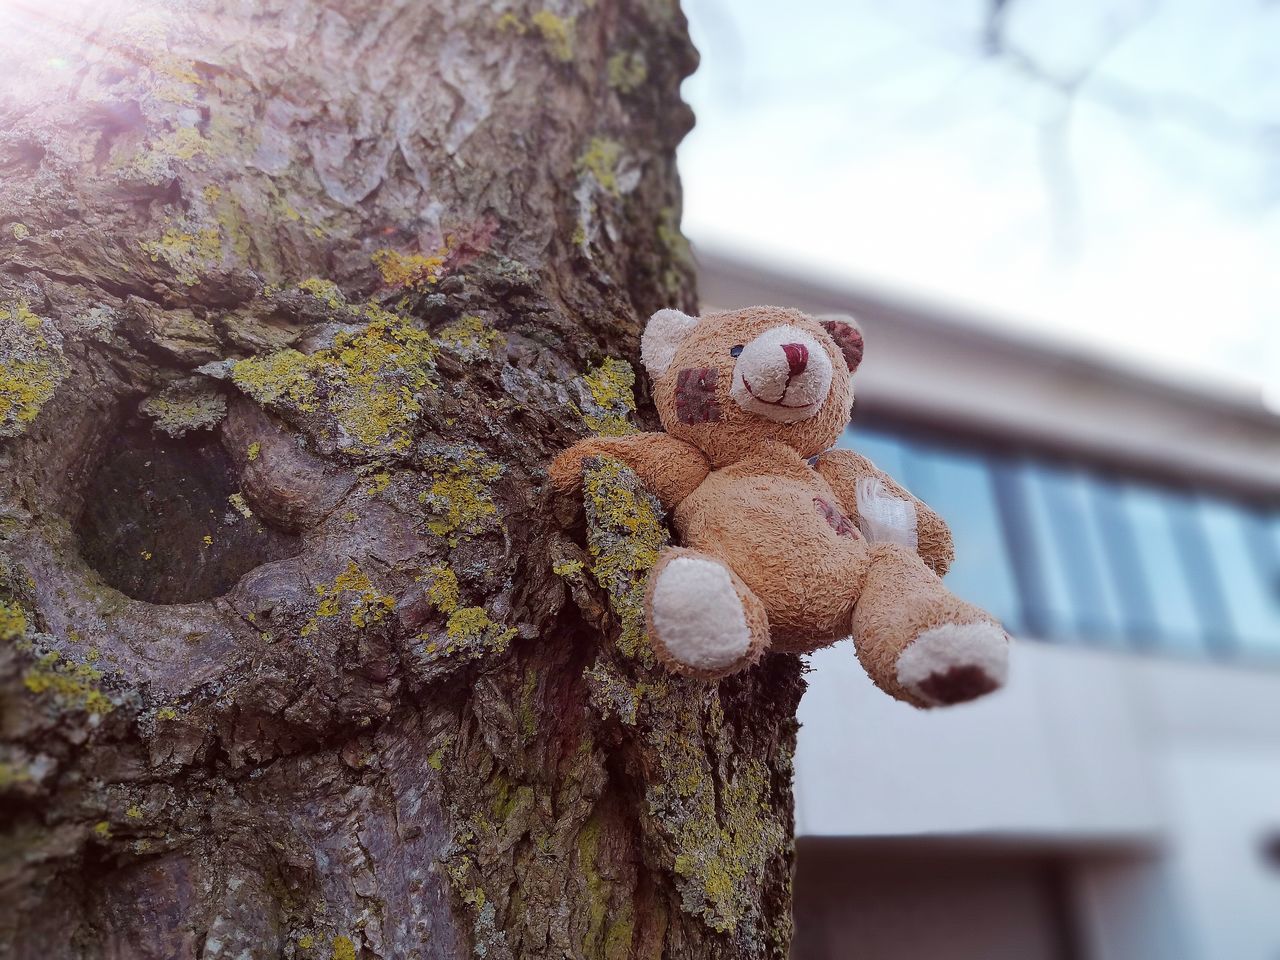 focus on foreground, no people, nature, tree trunk, tree, day, close-up, outdoors, stuffed toy, sky